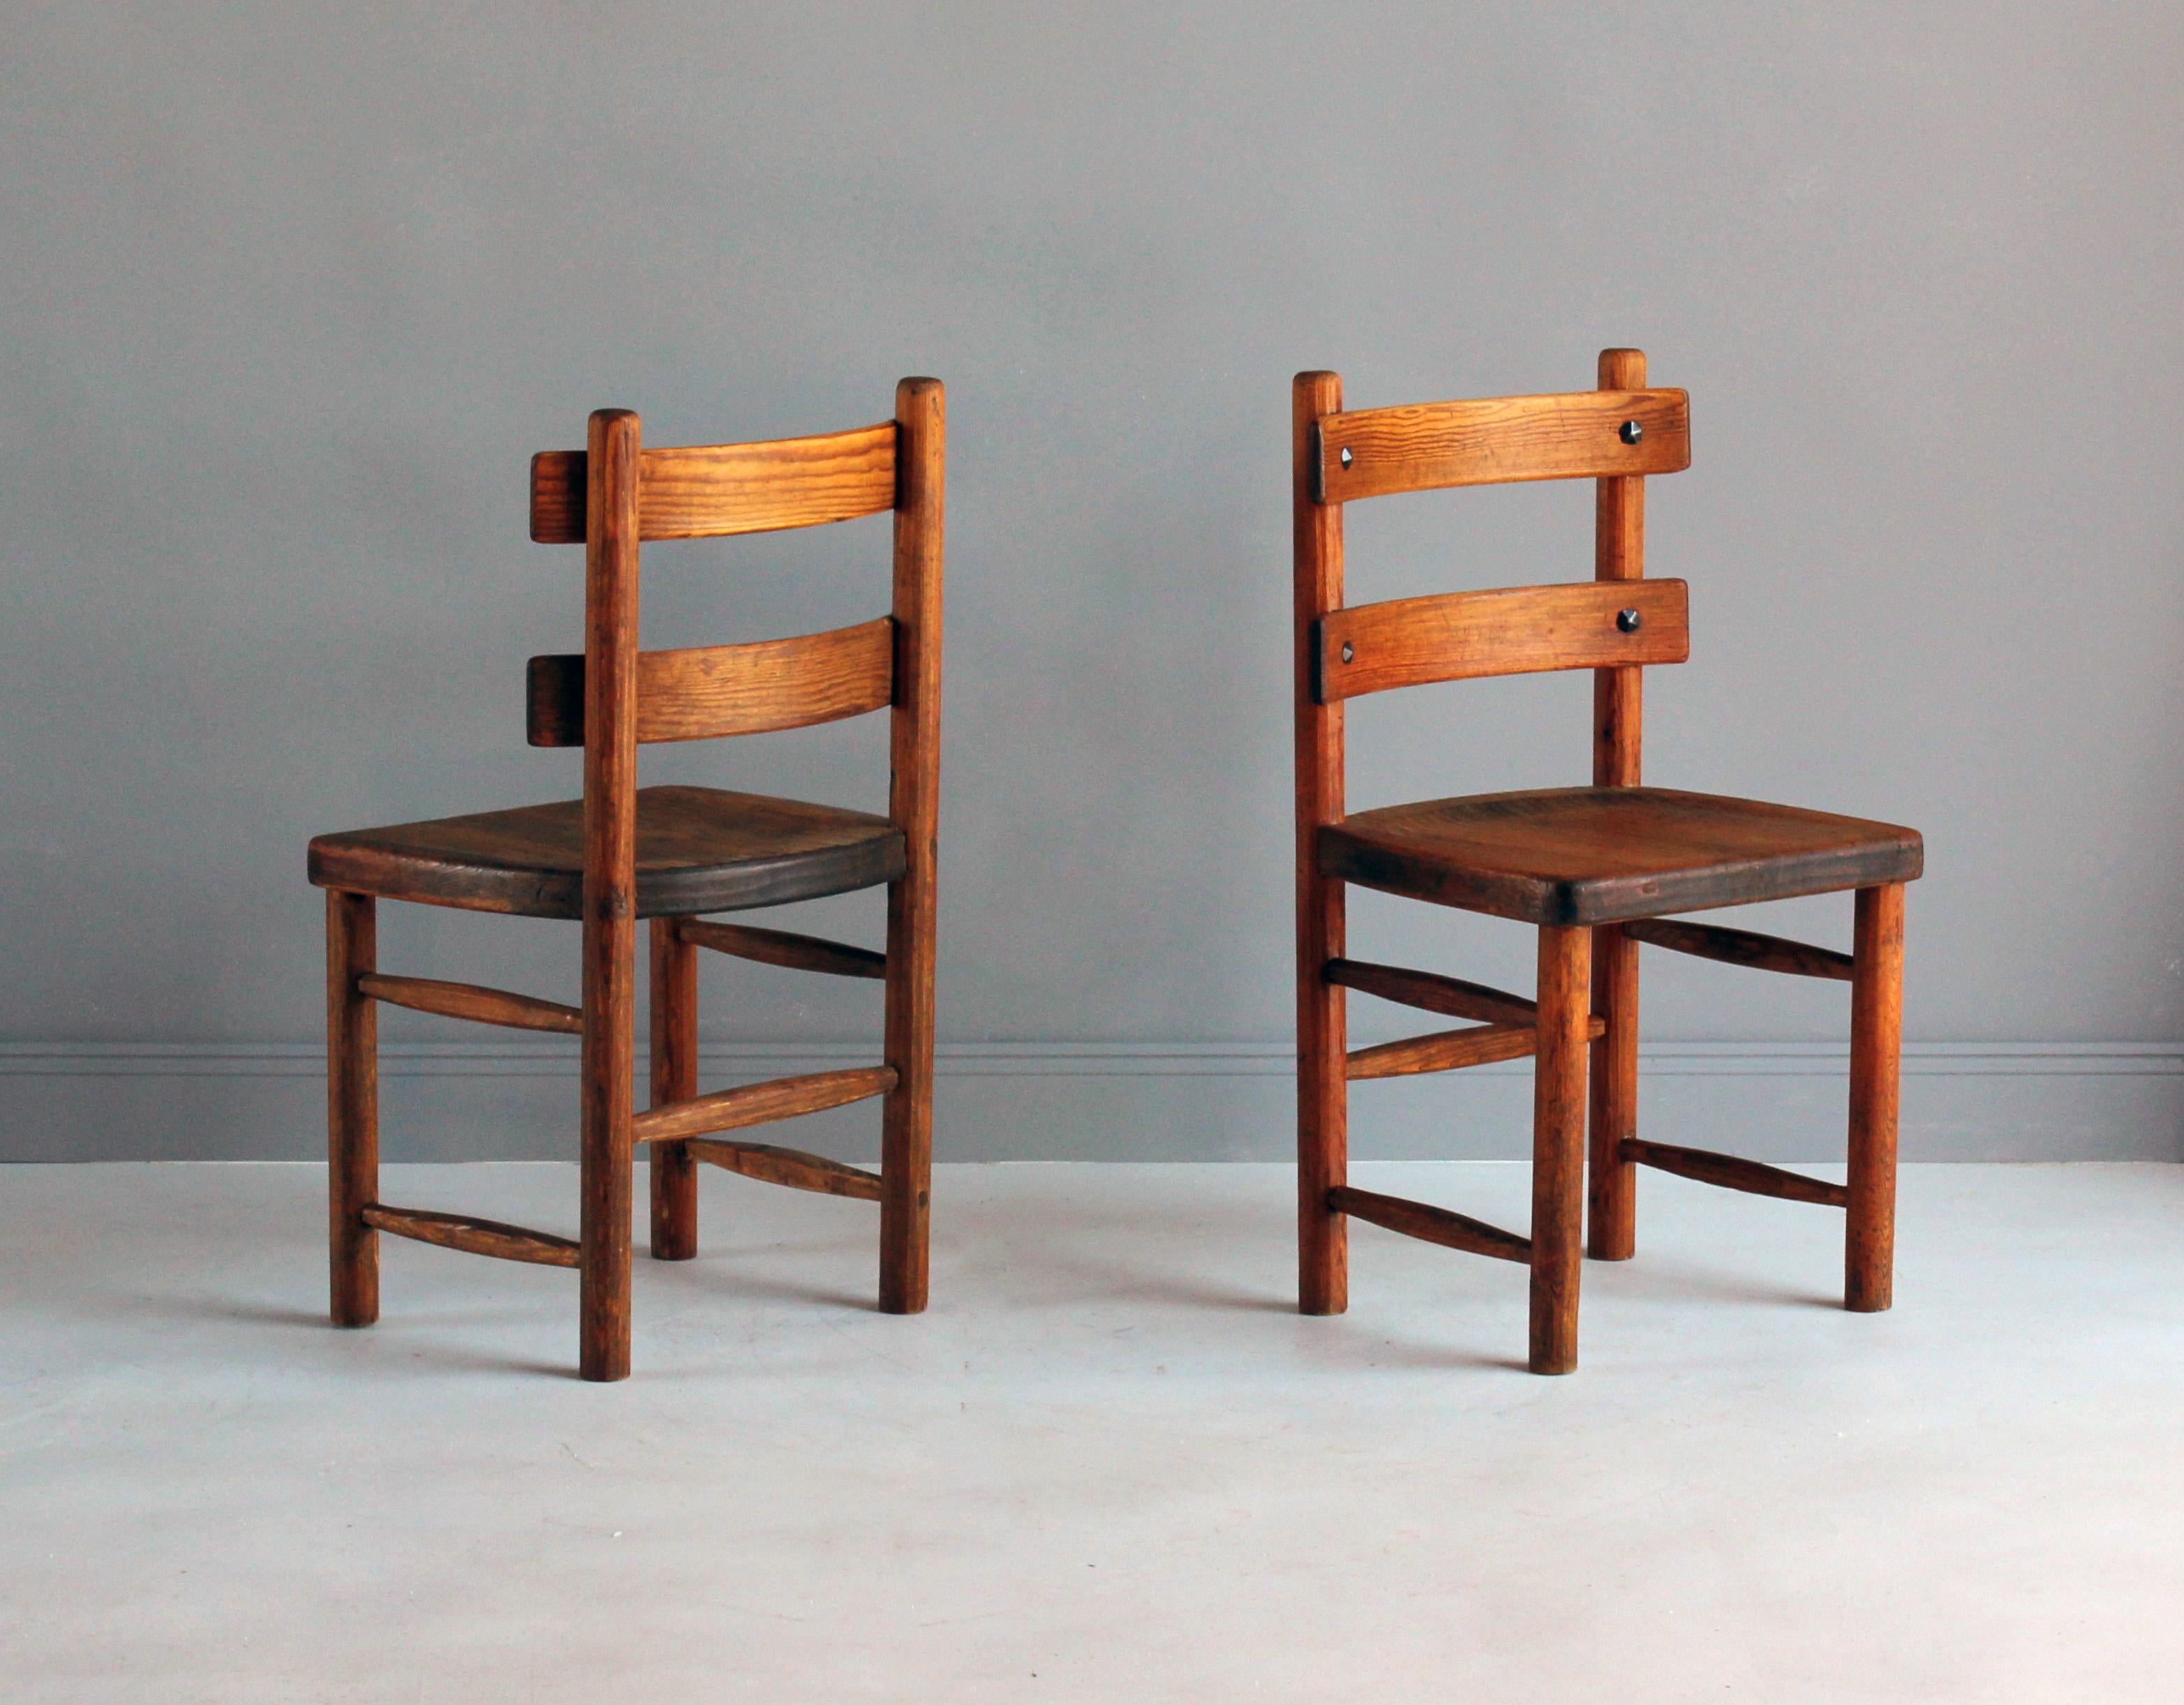 A pair of side chairs by Swedish architect and designer, Axel Einar Hjorth, produced by Nordiska Kompaniet in the early 1930s. Named 